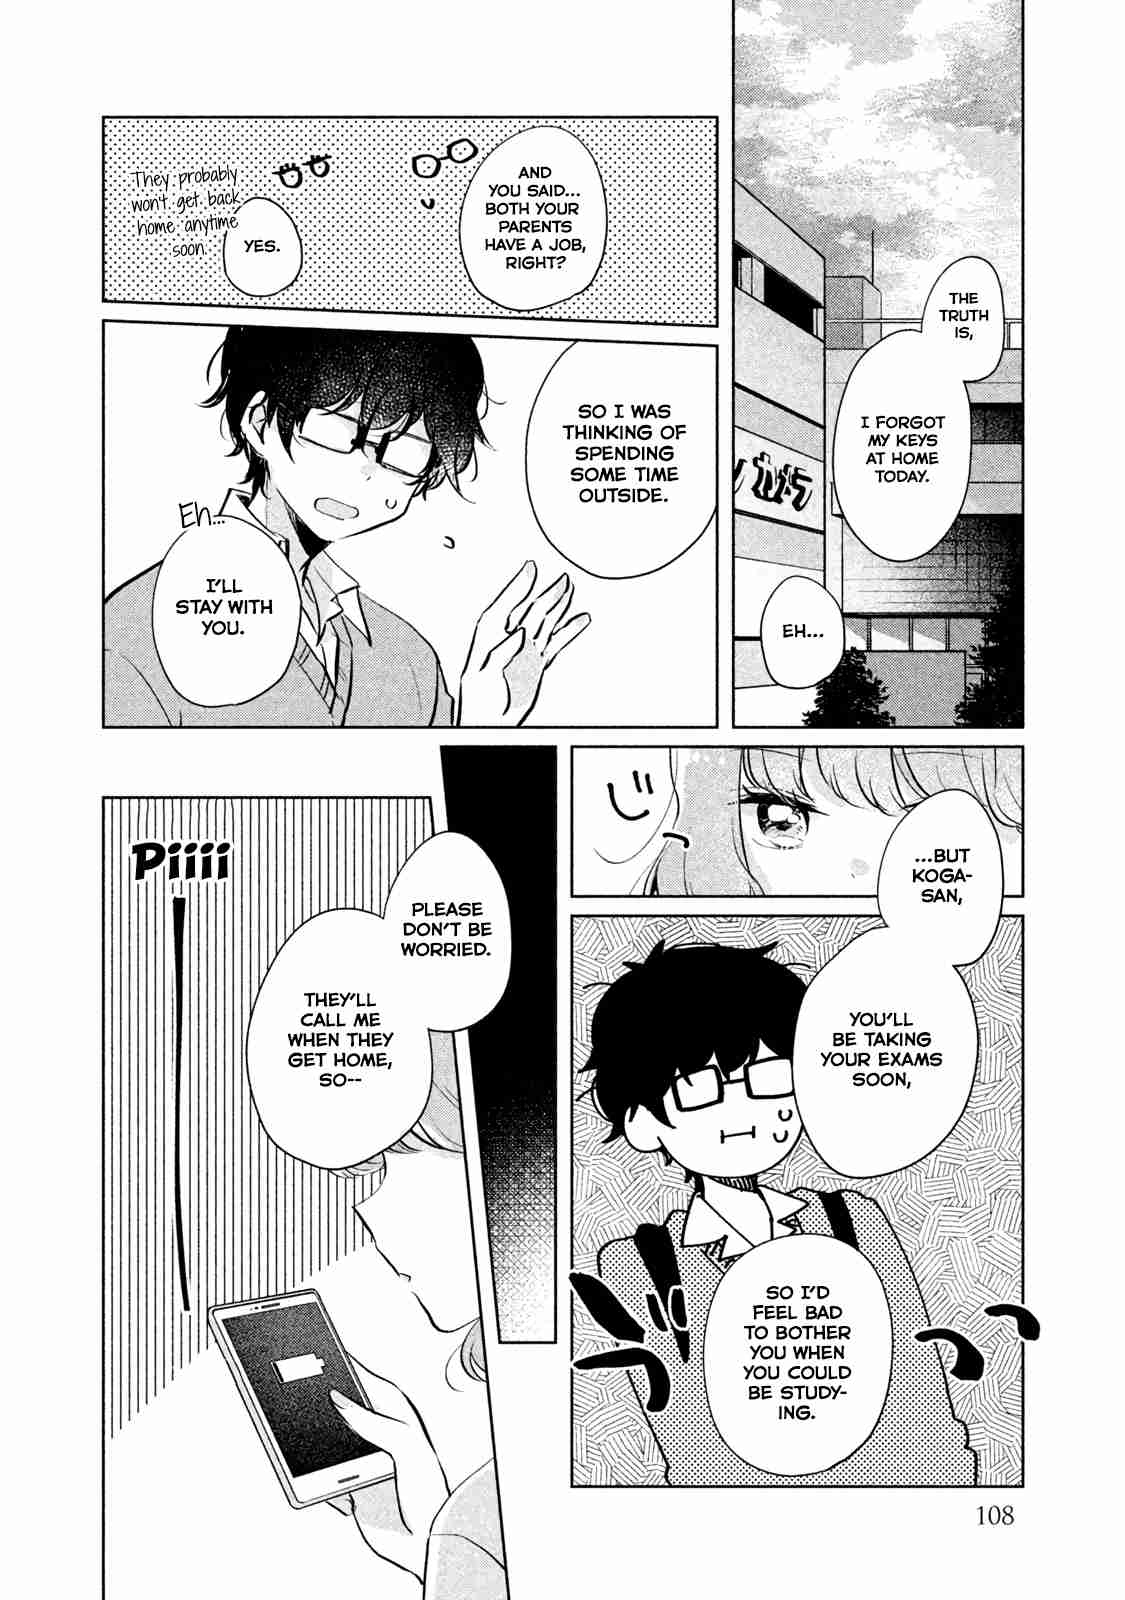 It's Not Meguro san's First Time Vol. 1 Ch. 9 Guilty Feelings